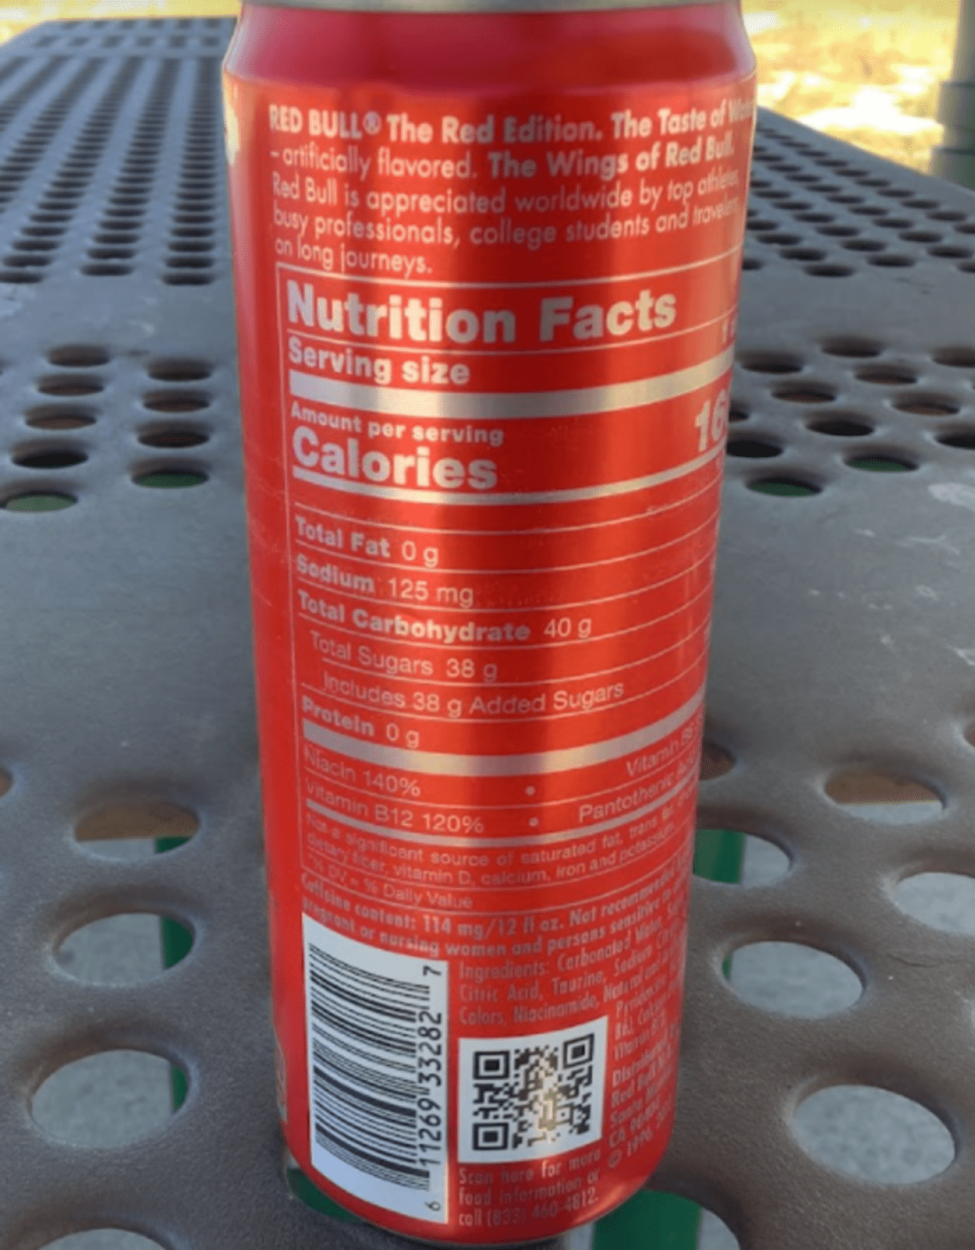 Nutrition facts of Red Bull Red Edition. 